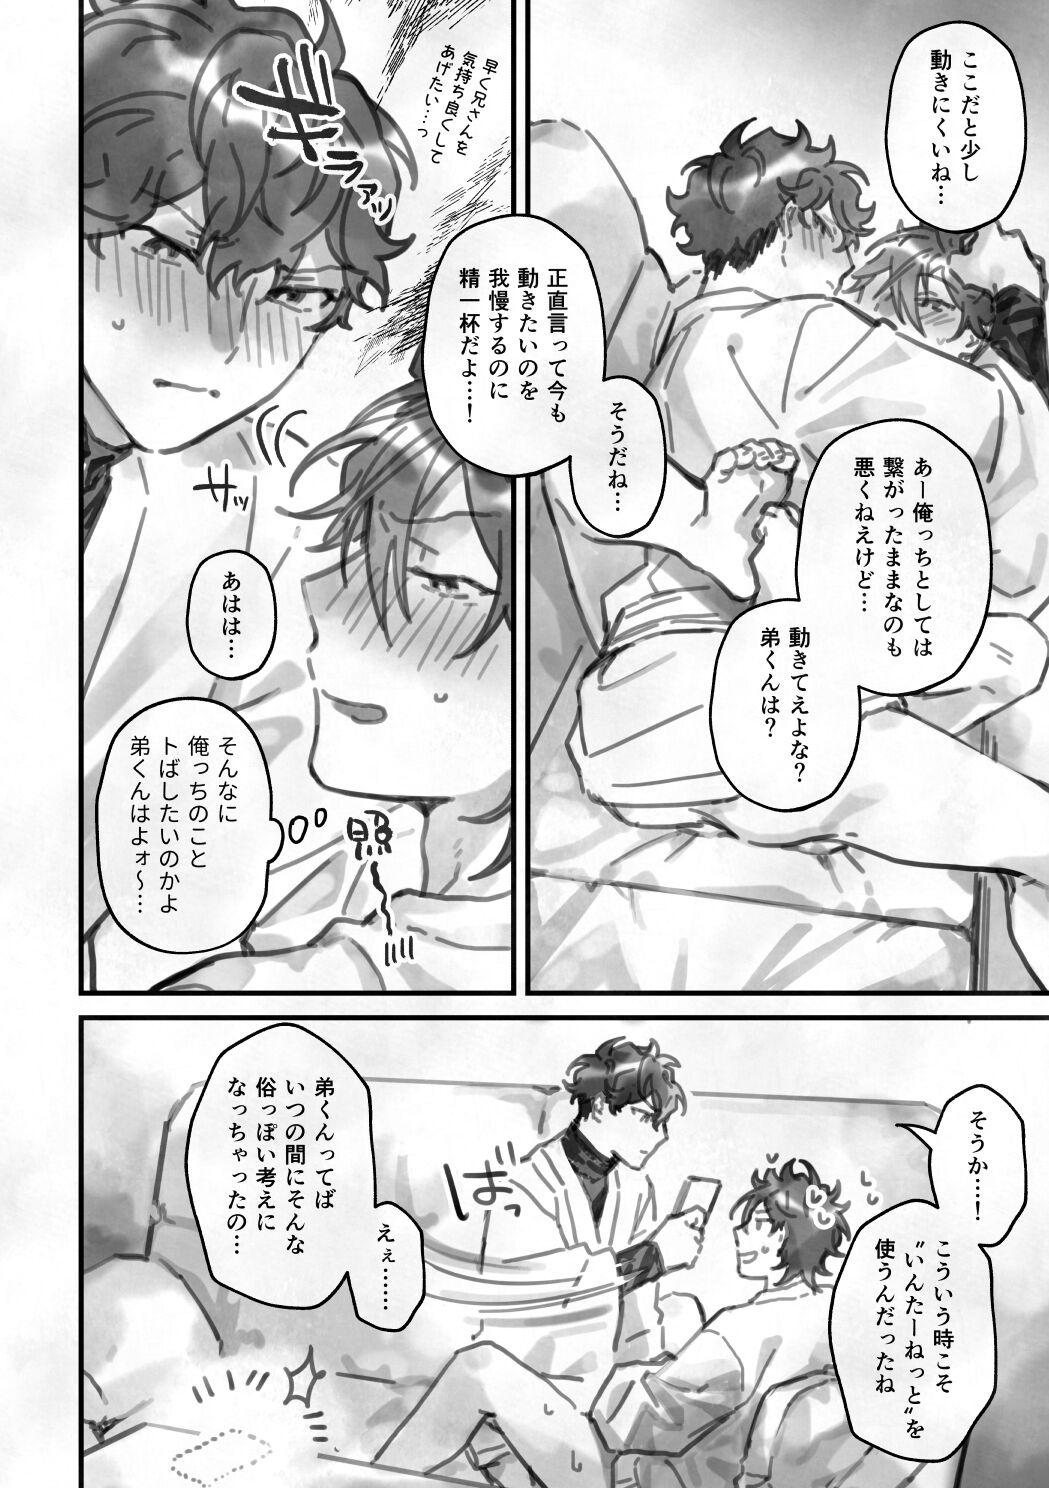 Bubblebutt Sumika - Ensemble stars Outdoor Sex - Page 13